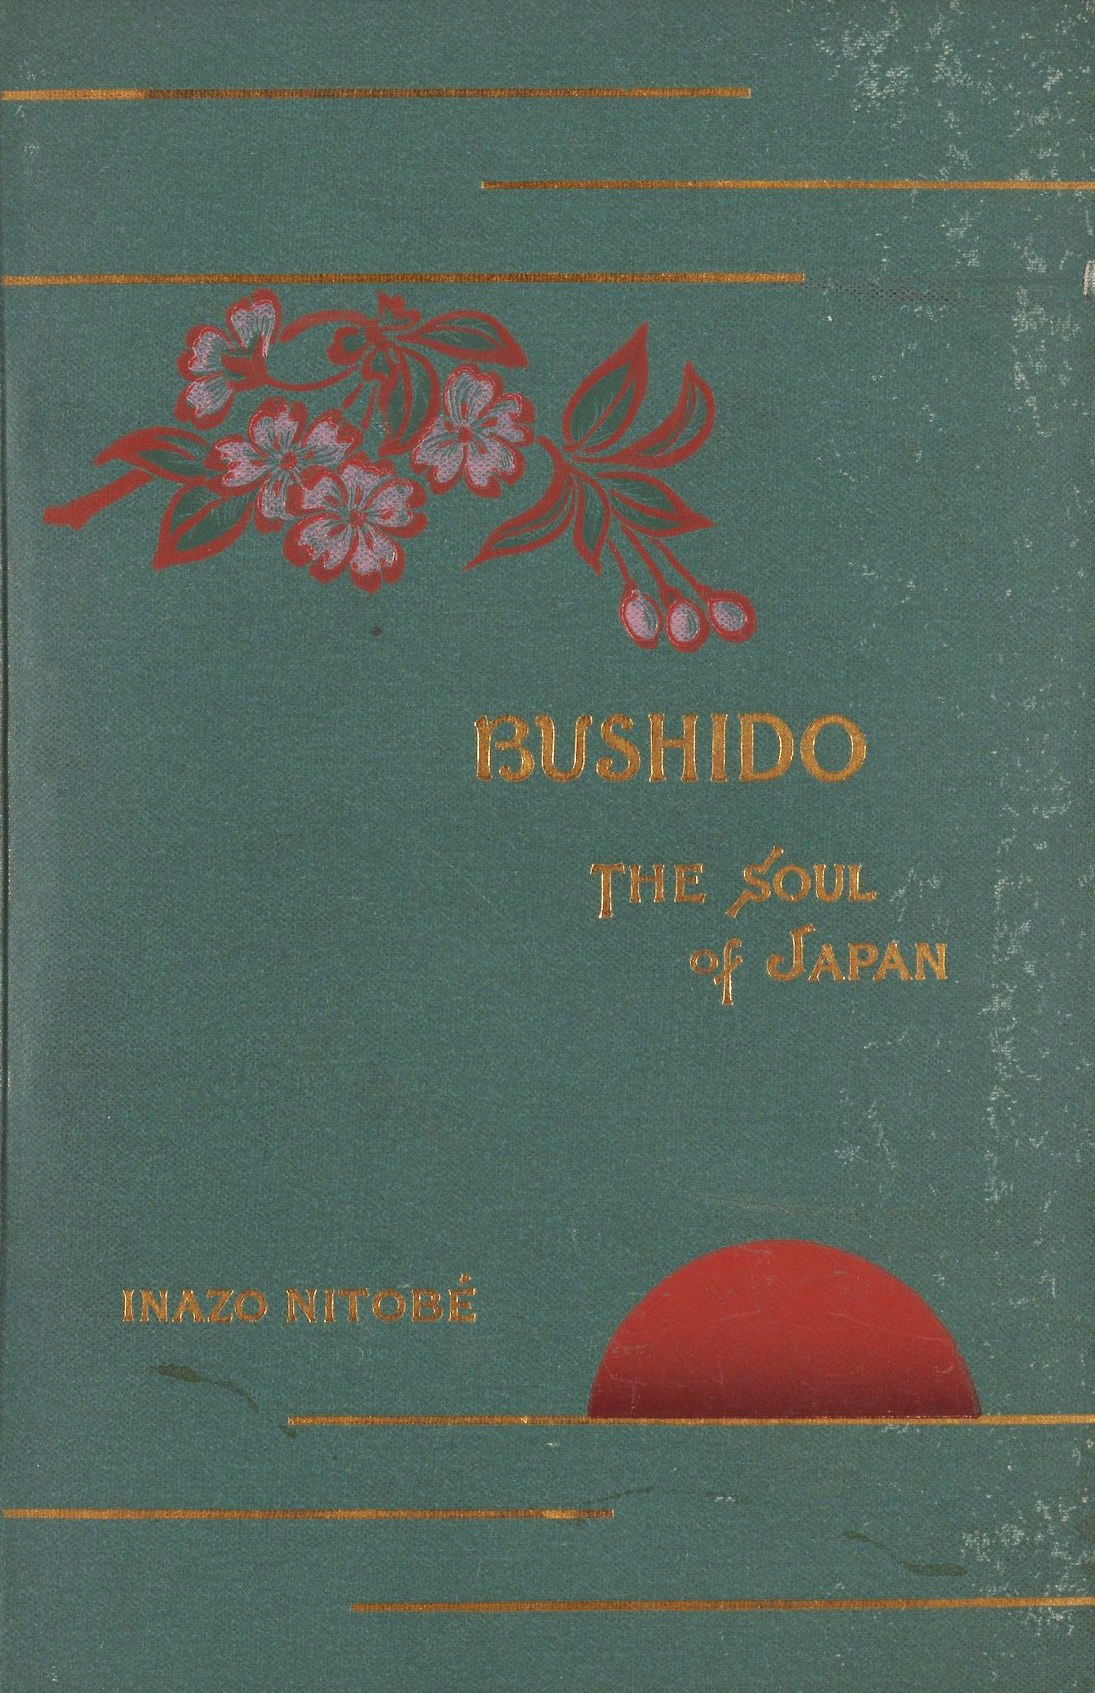 Vintage book cover of "bushido: the soul of japan" by inazo nitobe with a floral design and a red circle evocative of the japanese flag.